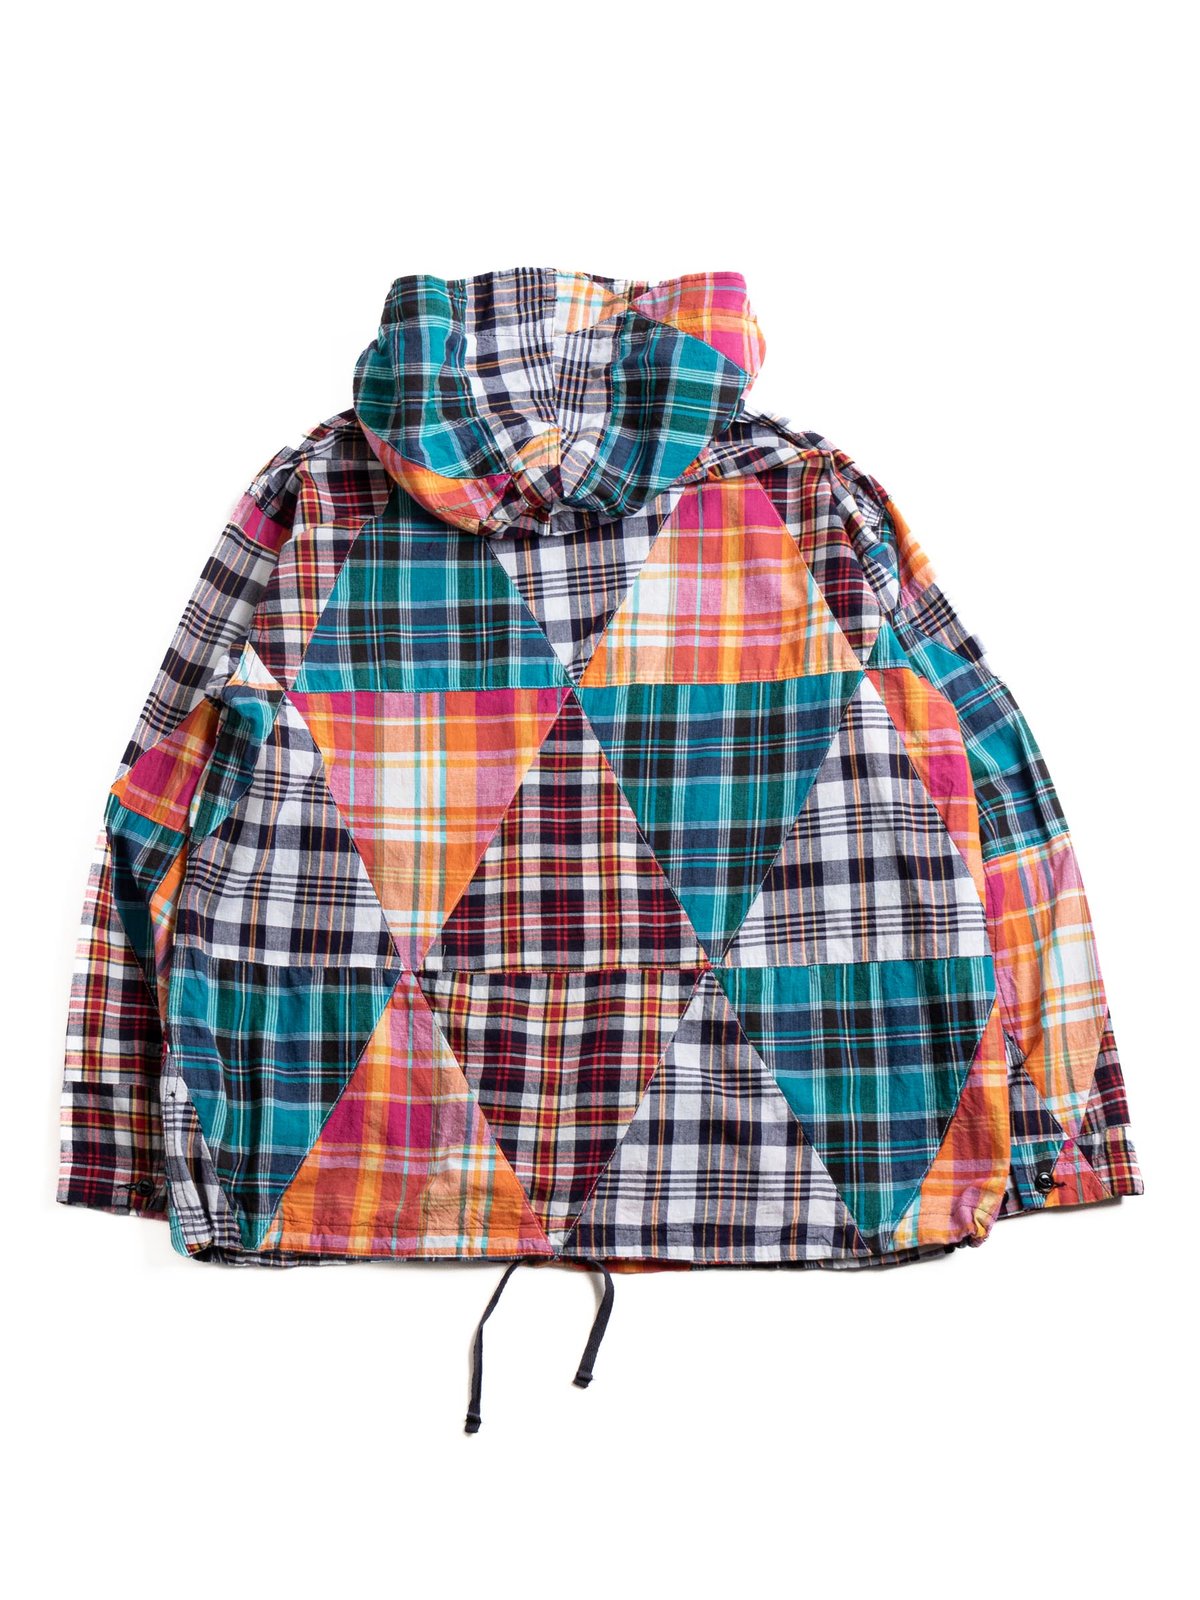 CAGOULE SHIRT MULTI COLOR TRIANGLE PATCHWORK - Image 5